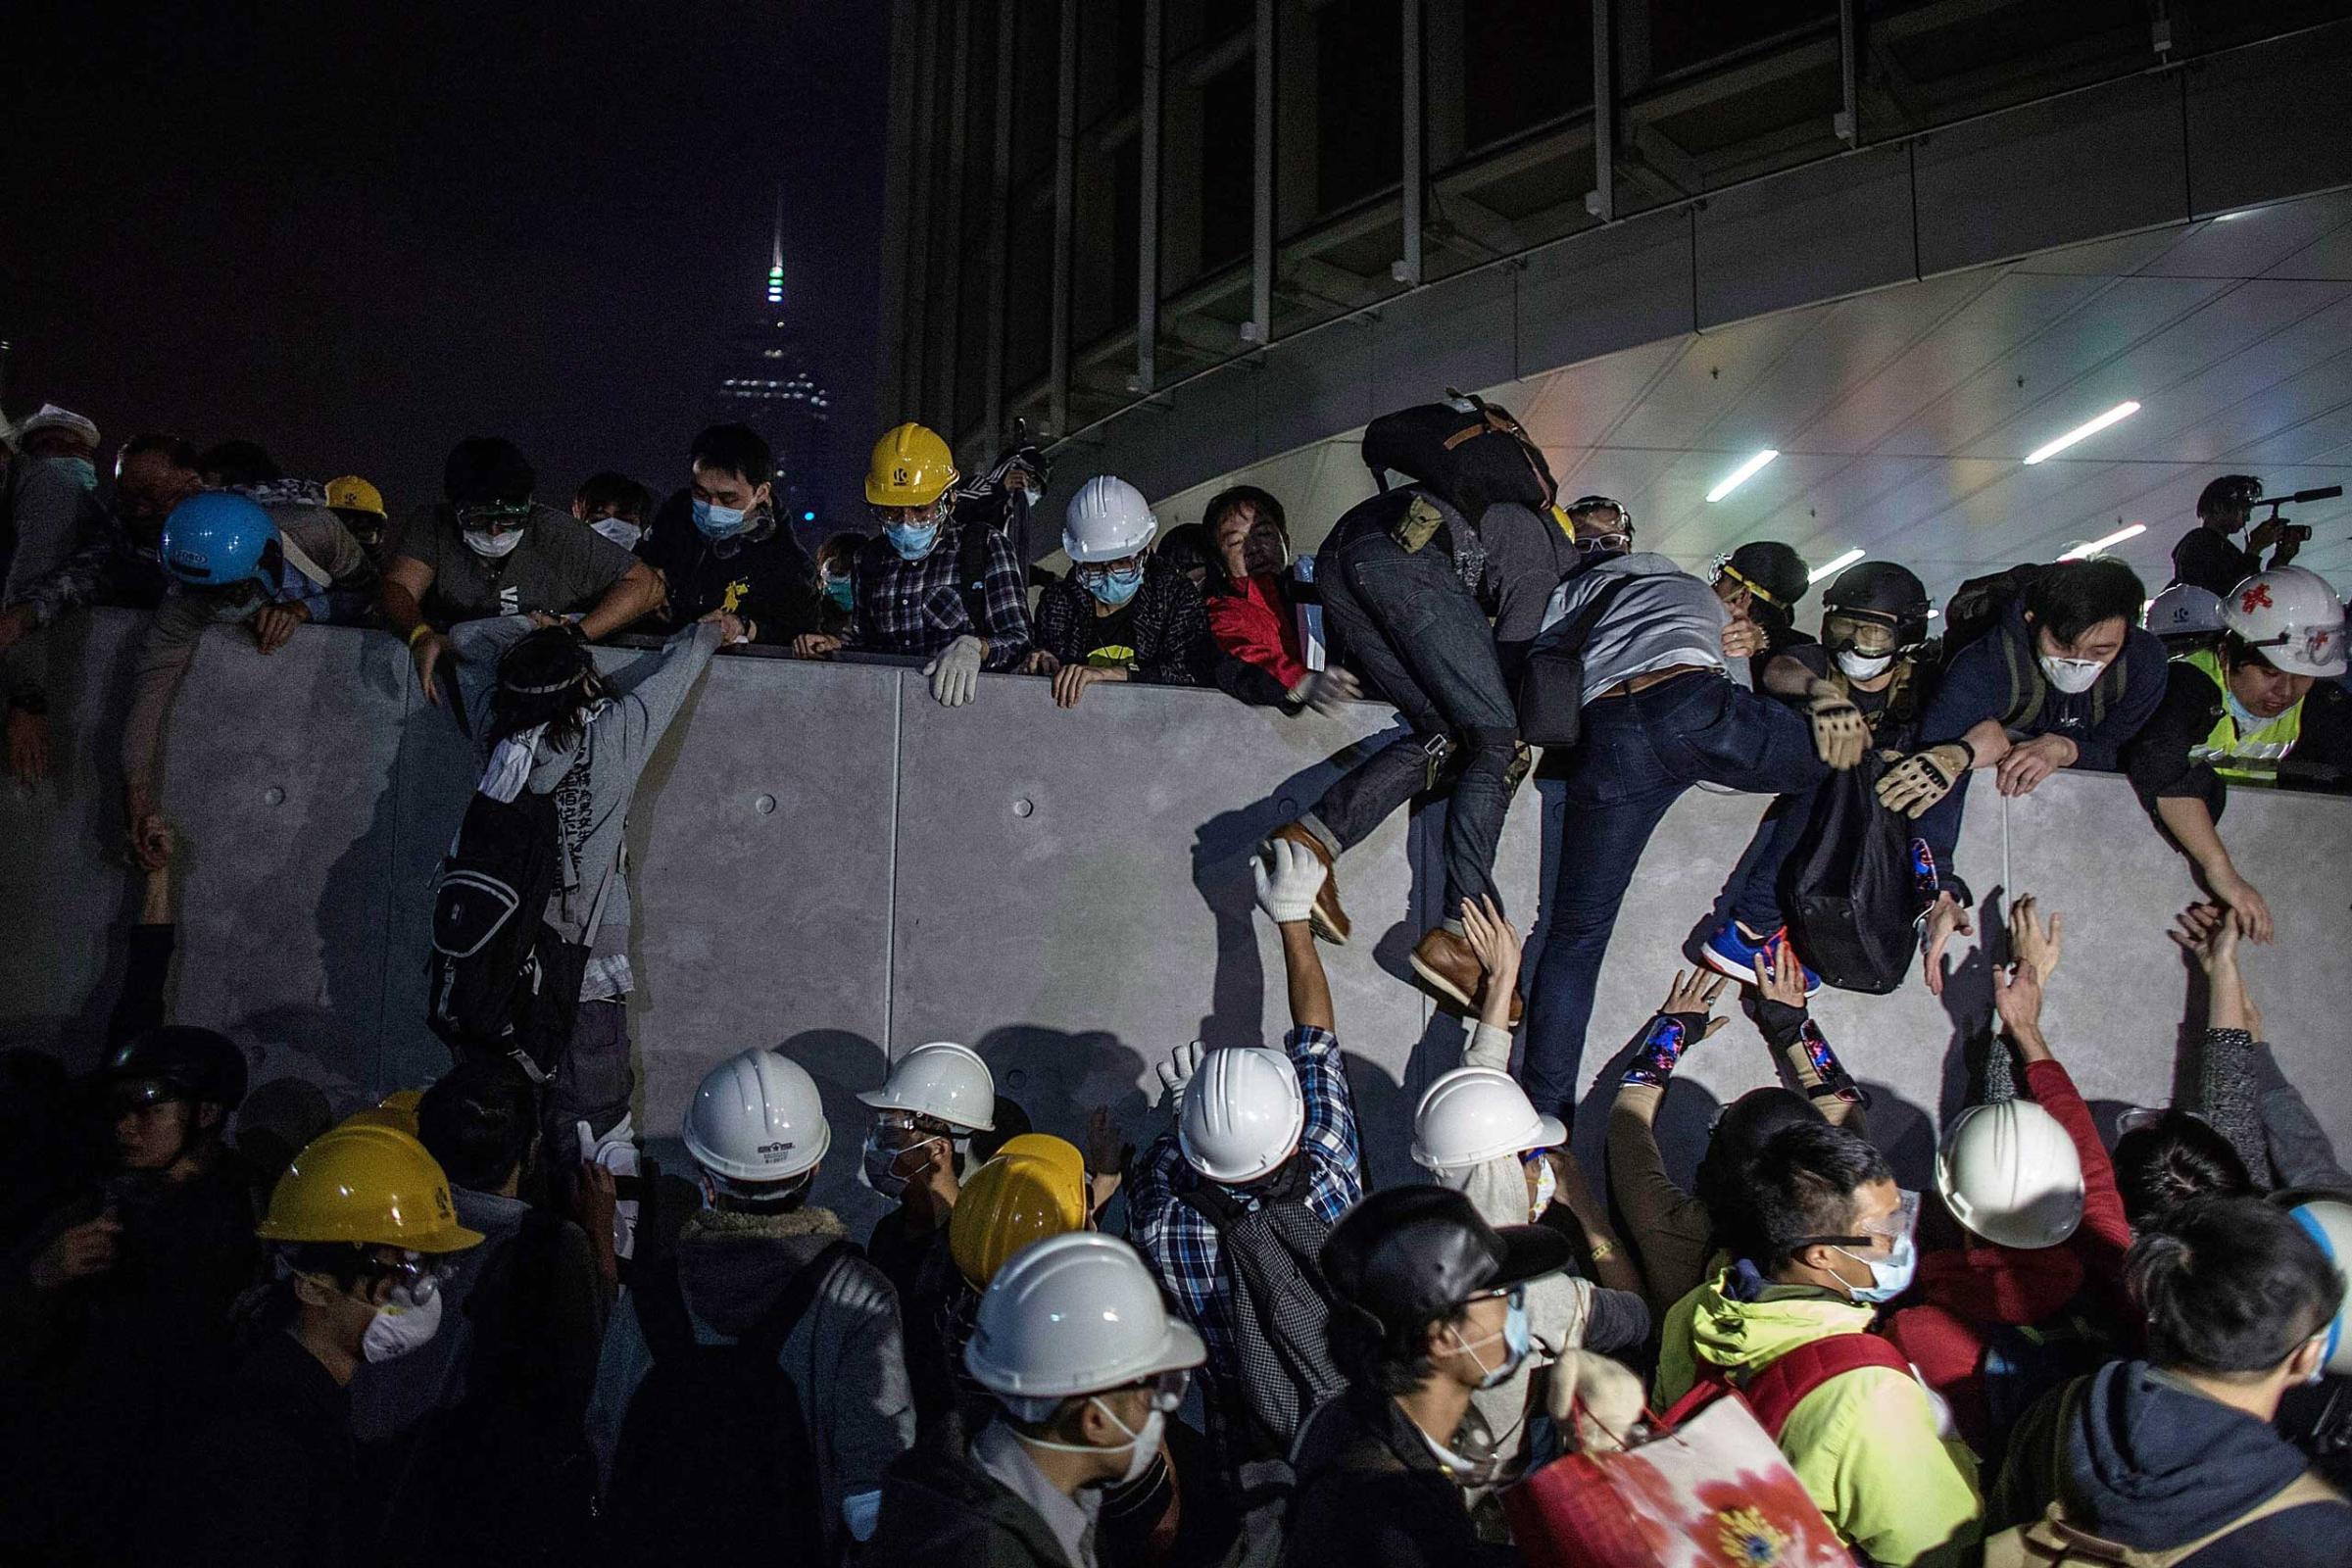 Pro-democracy protesters climb up a wall as police officers disperse them outside the Legislative Council building after clashes with pro-democracy activists on Nov. 19, 2014 in Hong Kong.